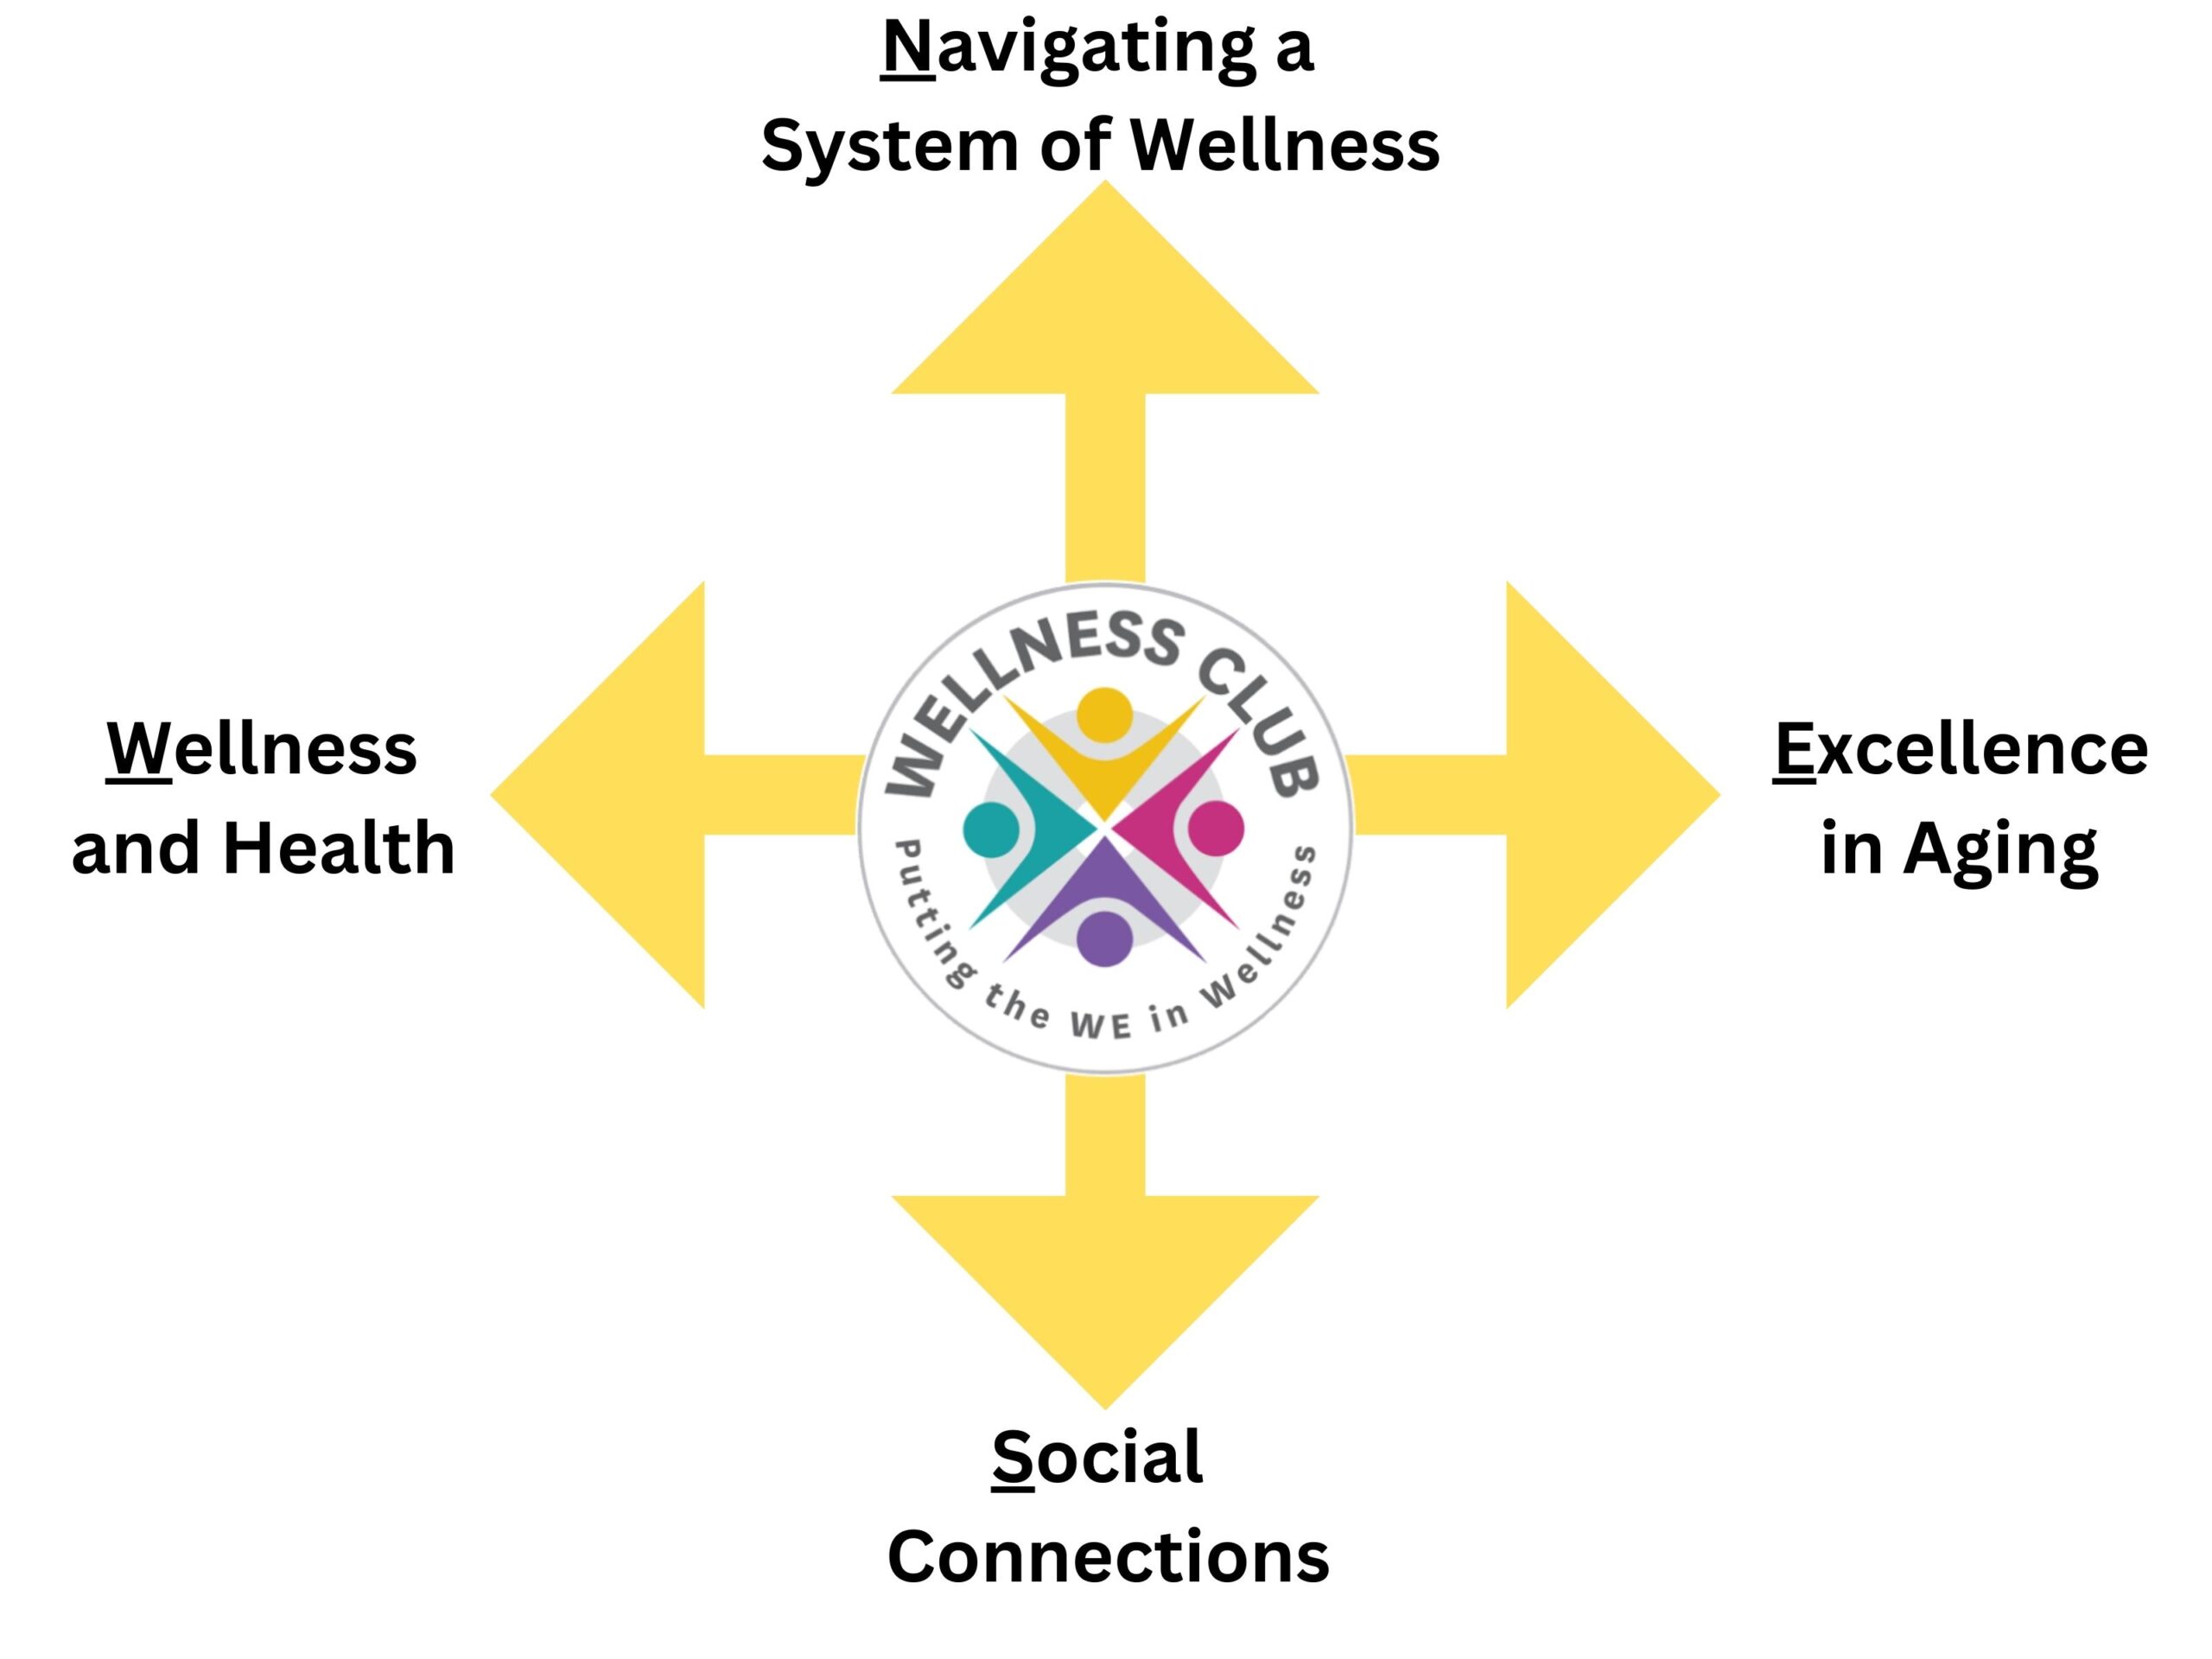 Navigating a System of Wellness, Excellence in Aging, Social Connections, Wellness and Health